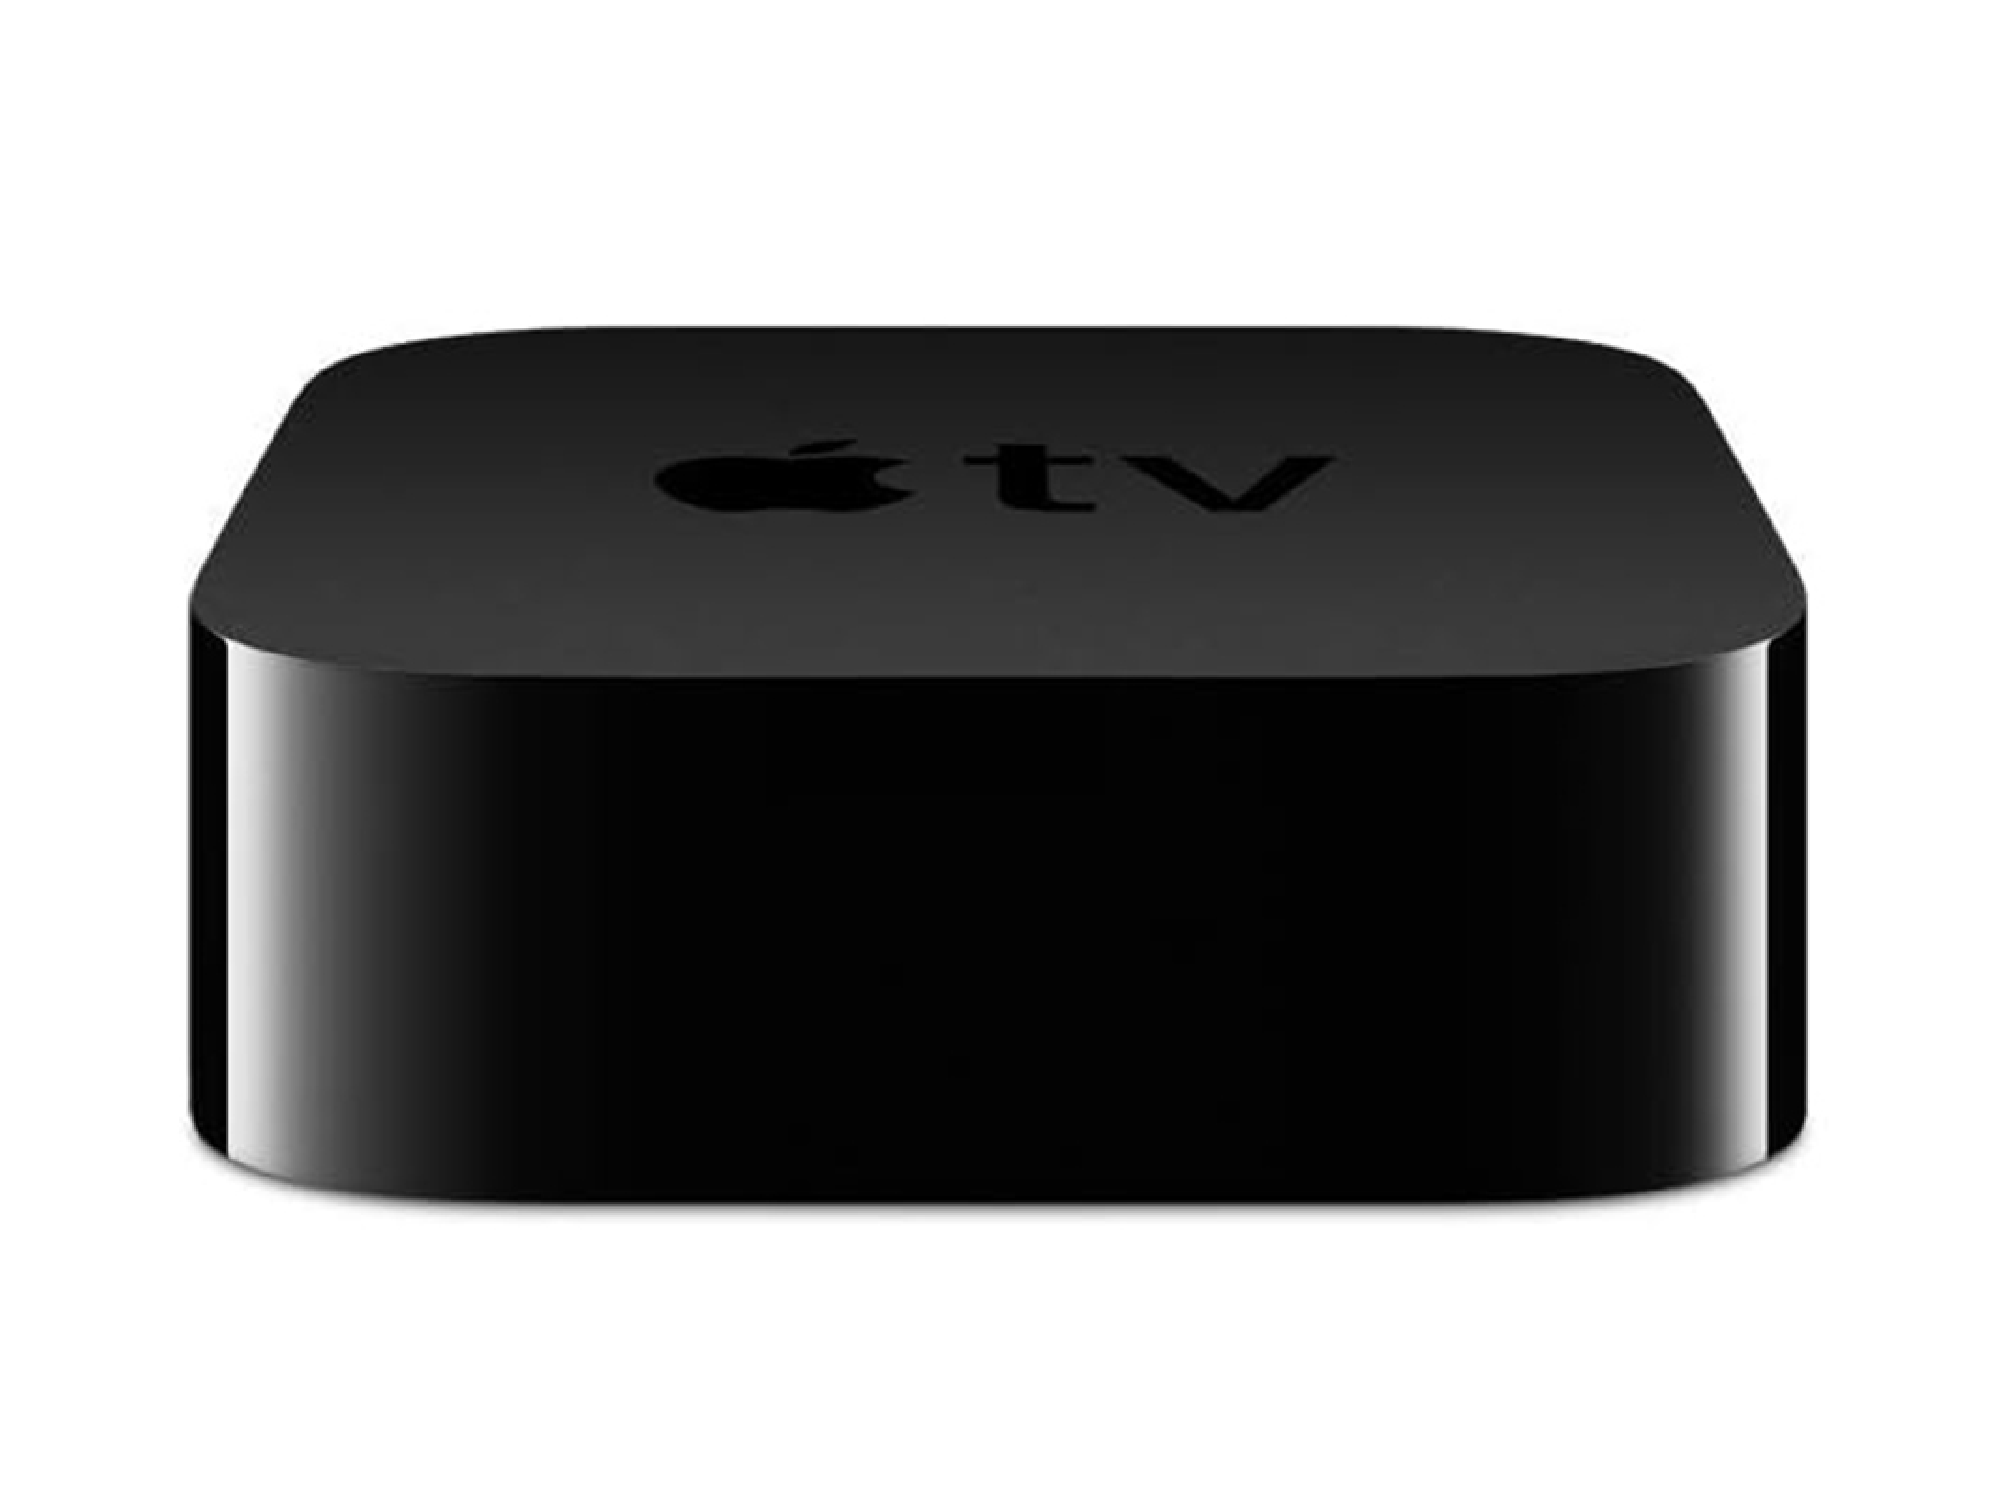 Upgrade your entertainment system with this  Apple TV and Siri Remote refurbished bundle